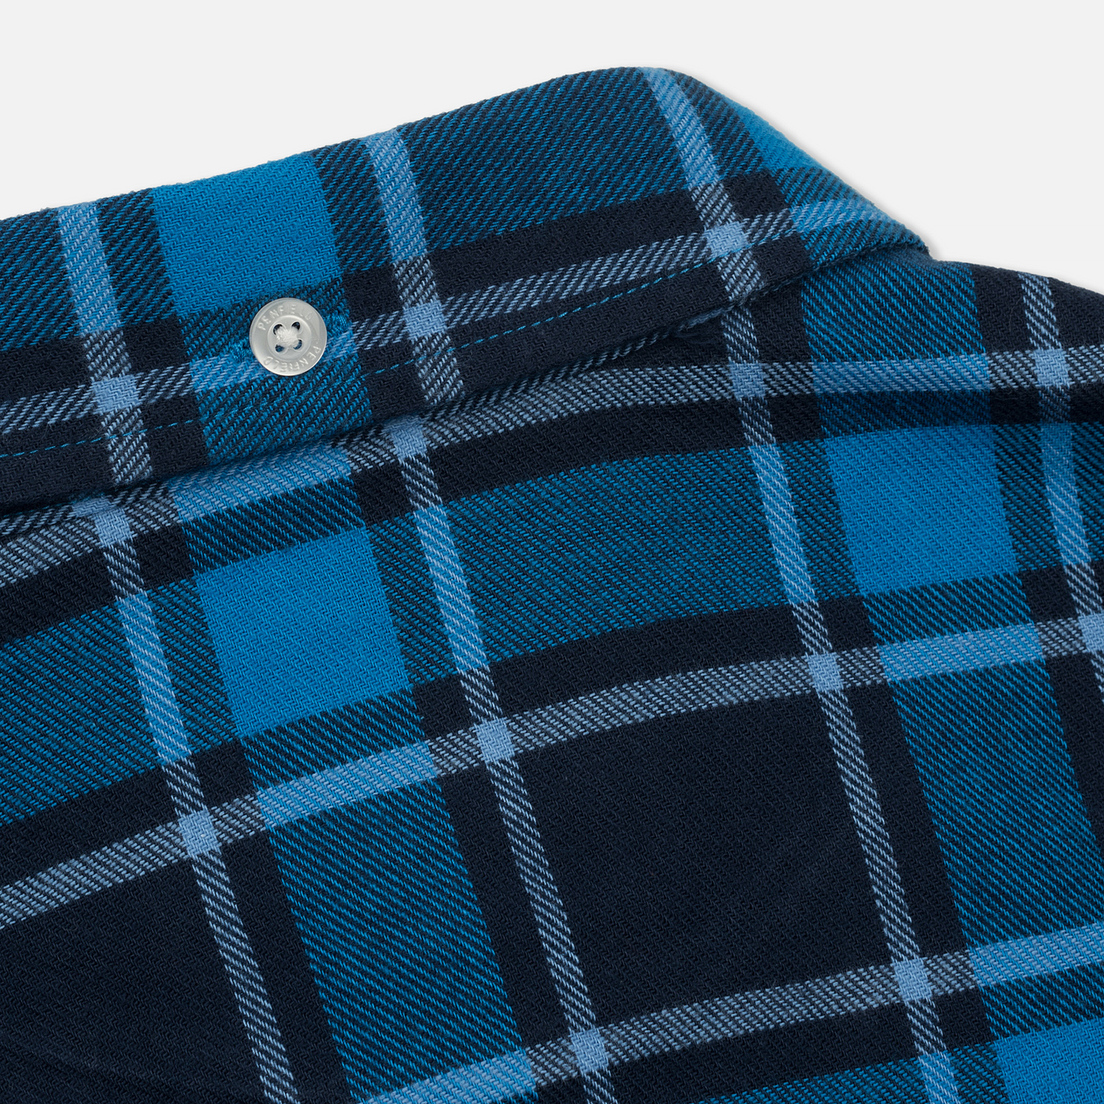 Penfield Мужская рубашка Ravens Brushed Cotton Checked